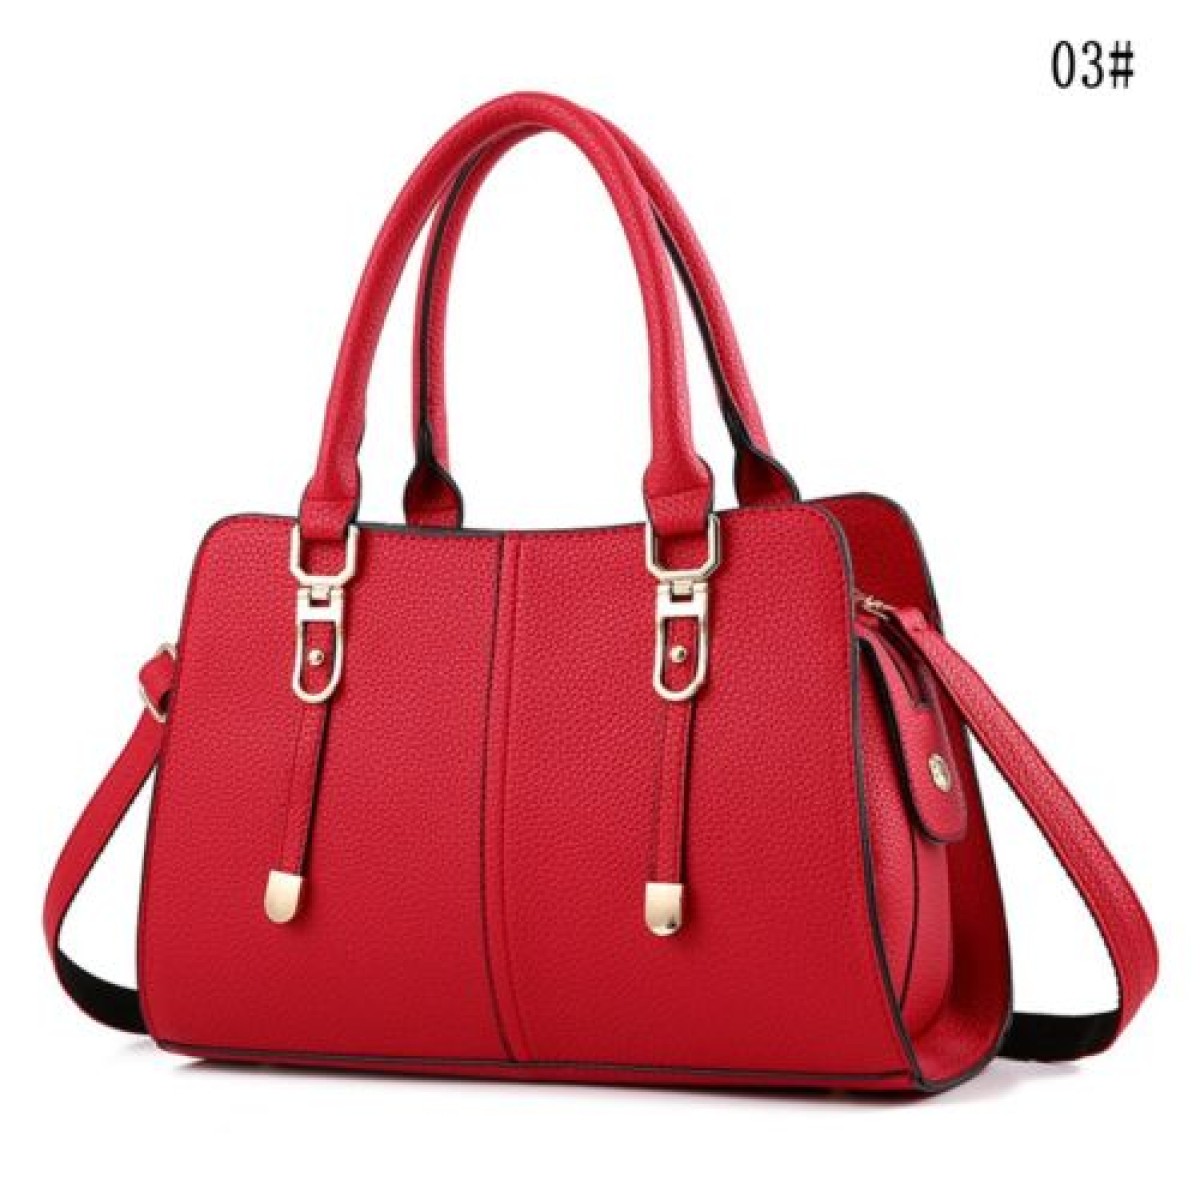 An Imported Horizontal Bag - Simply Fab Bags